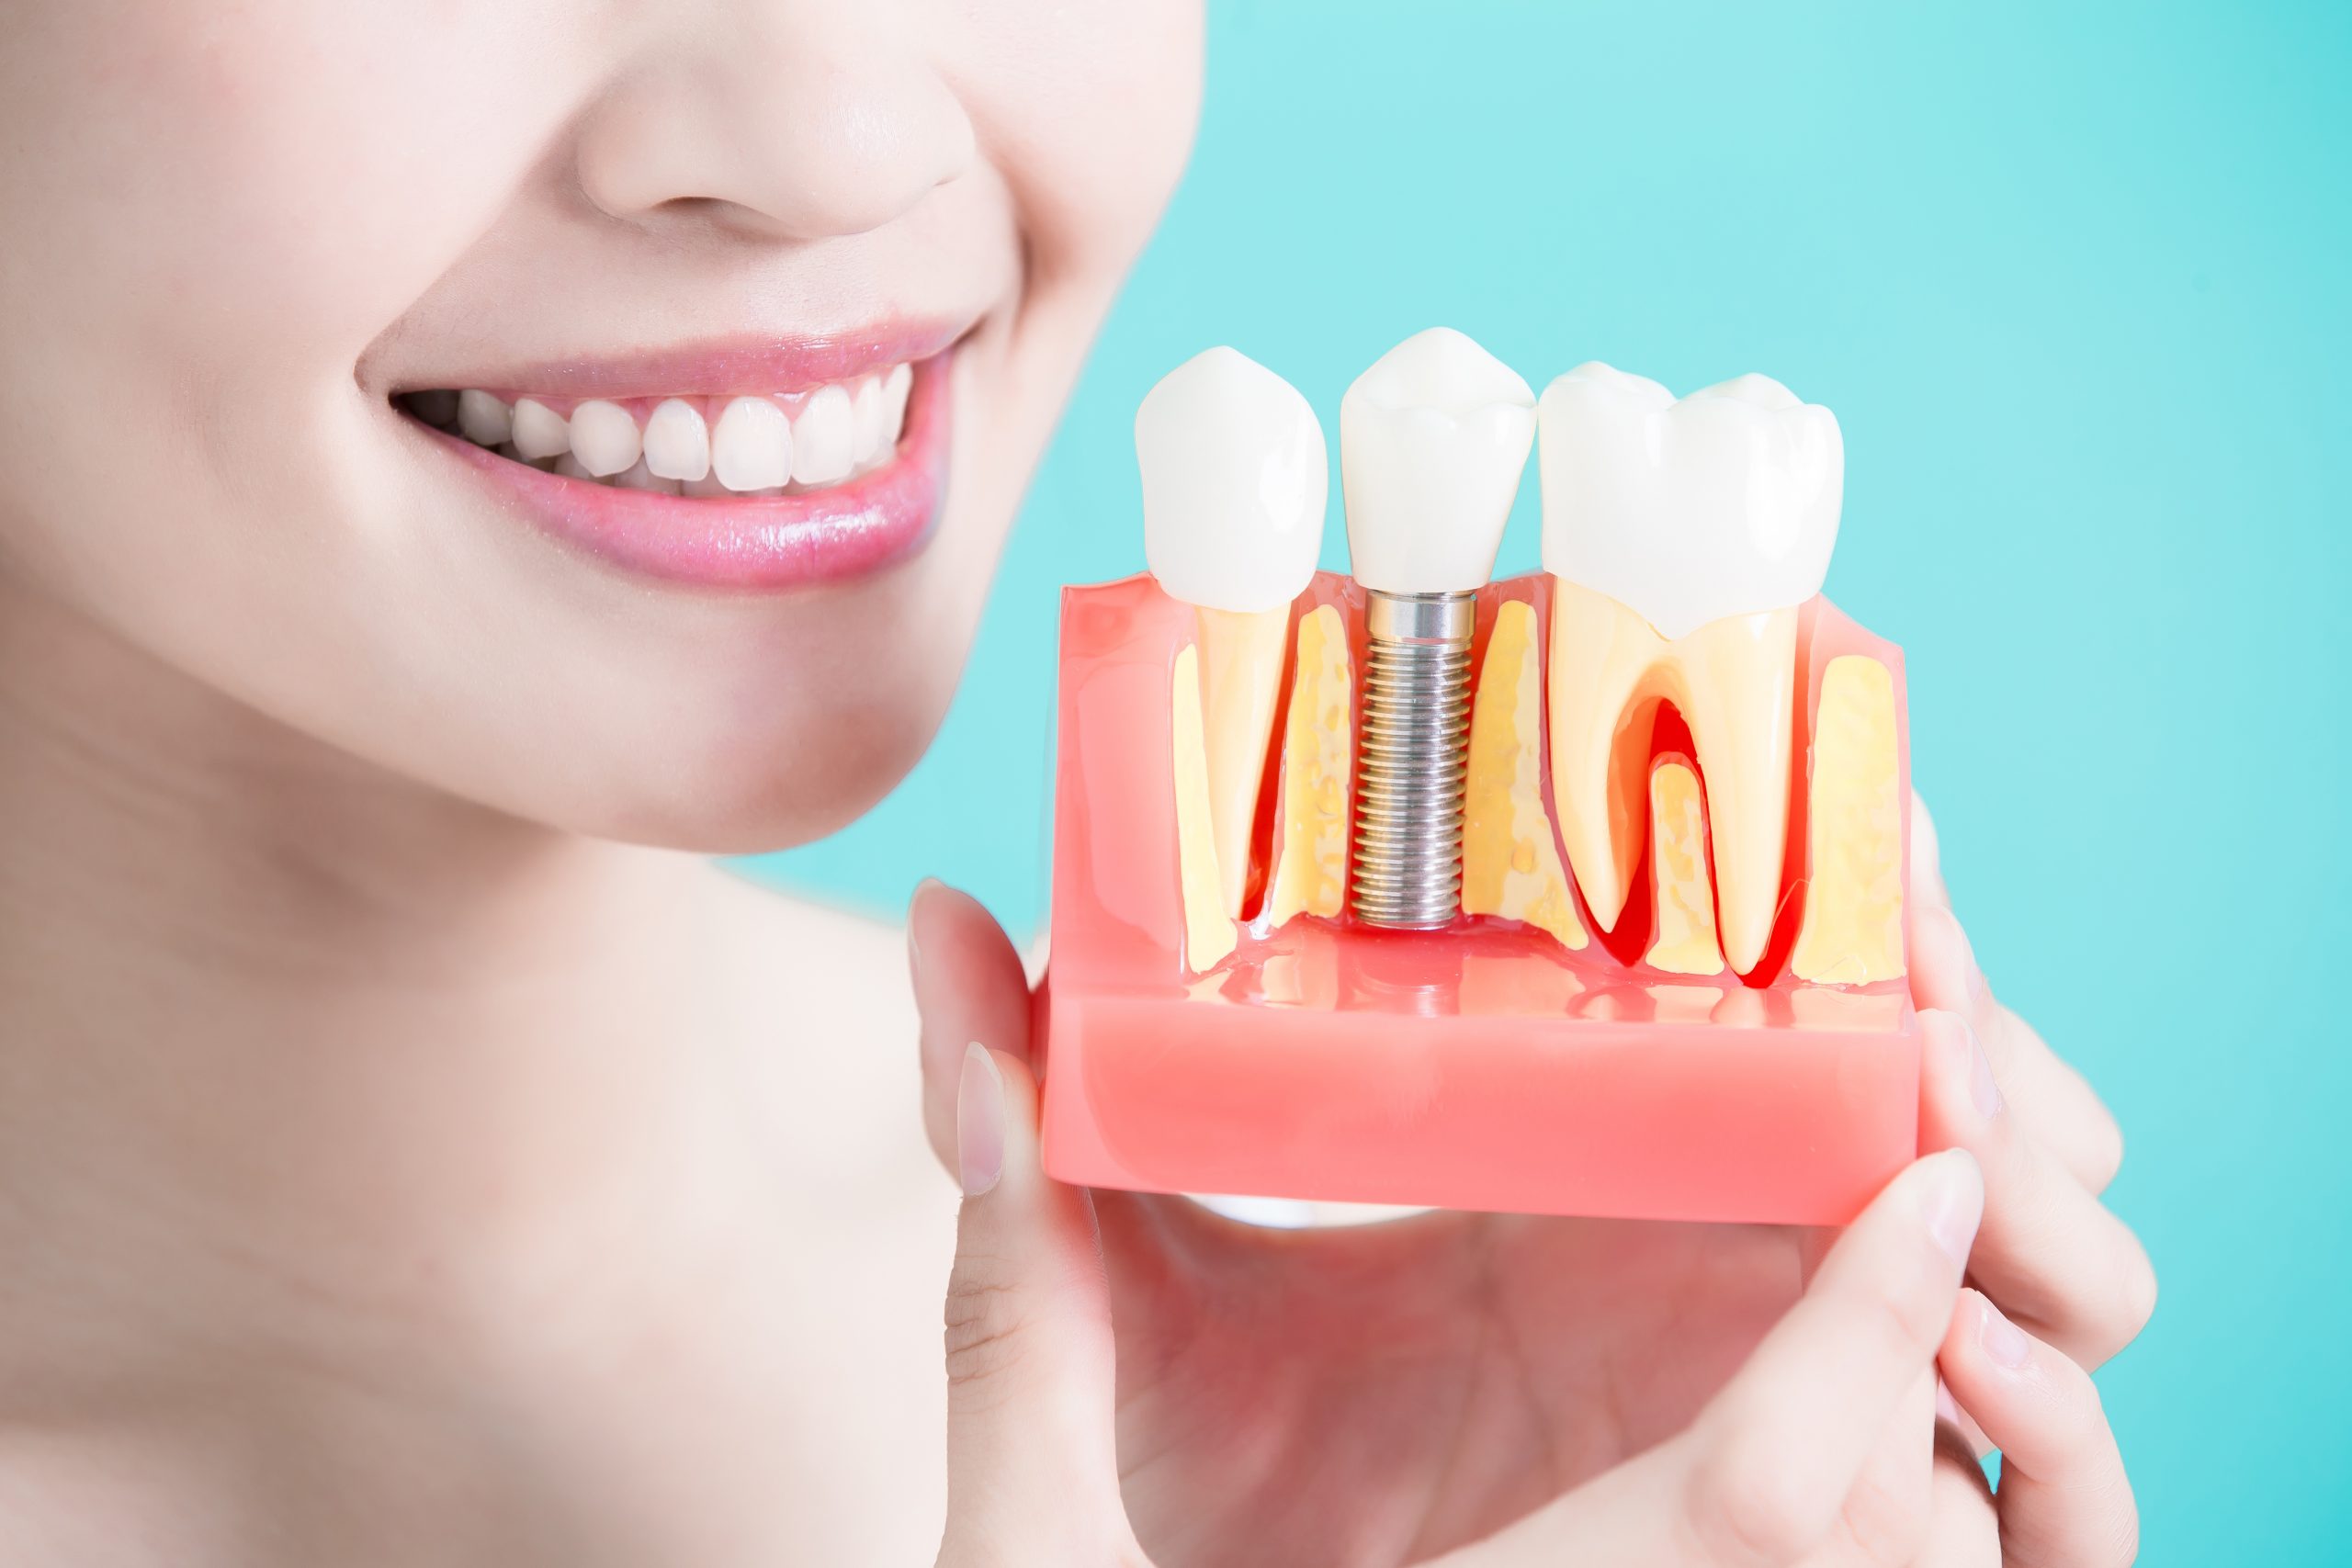 Does it Hurt to Get Dental Implants?